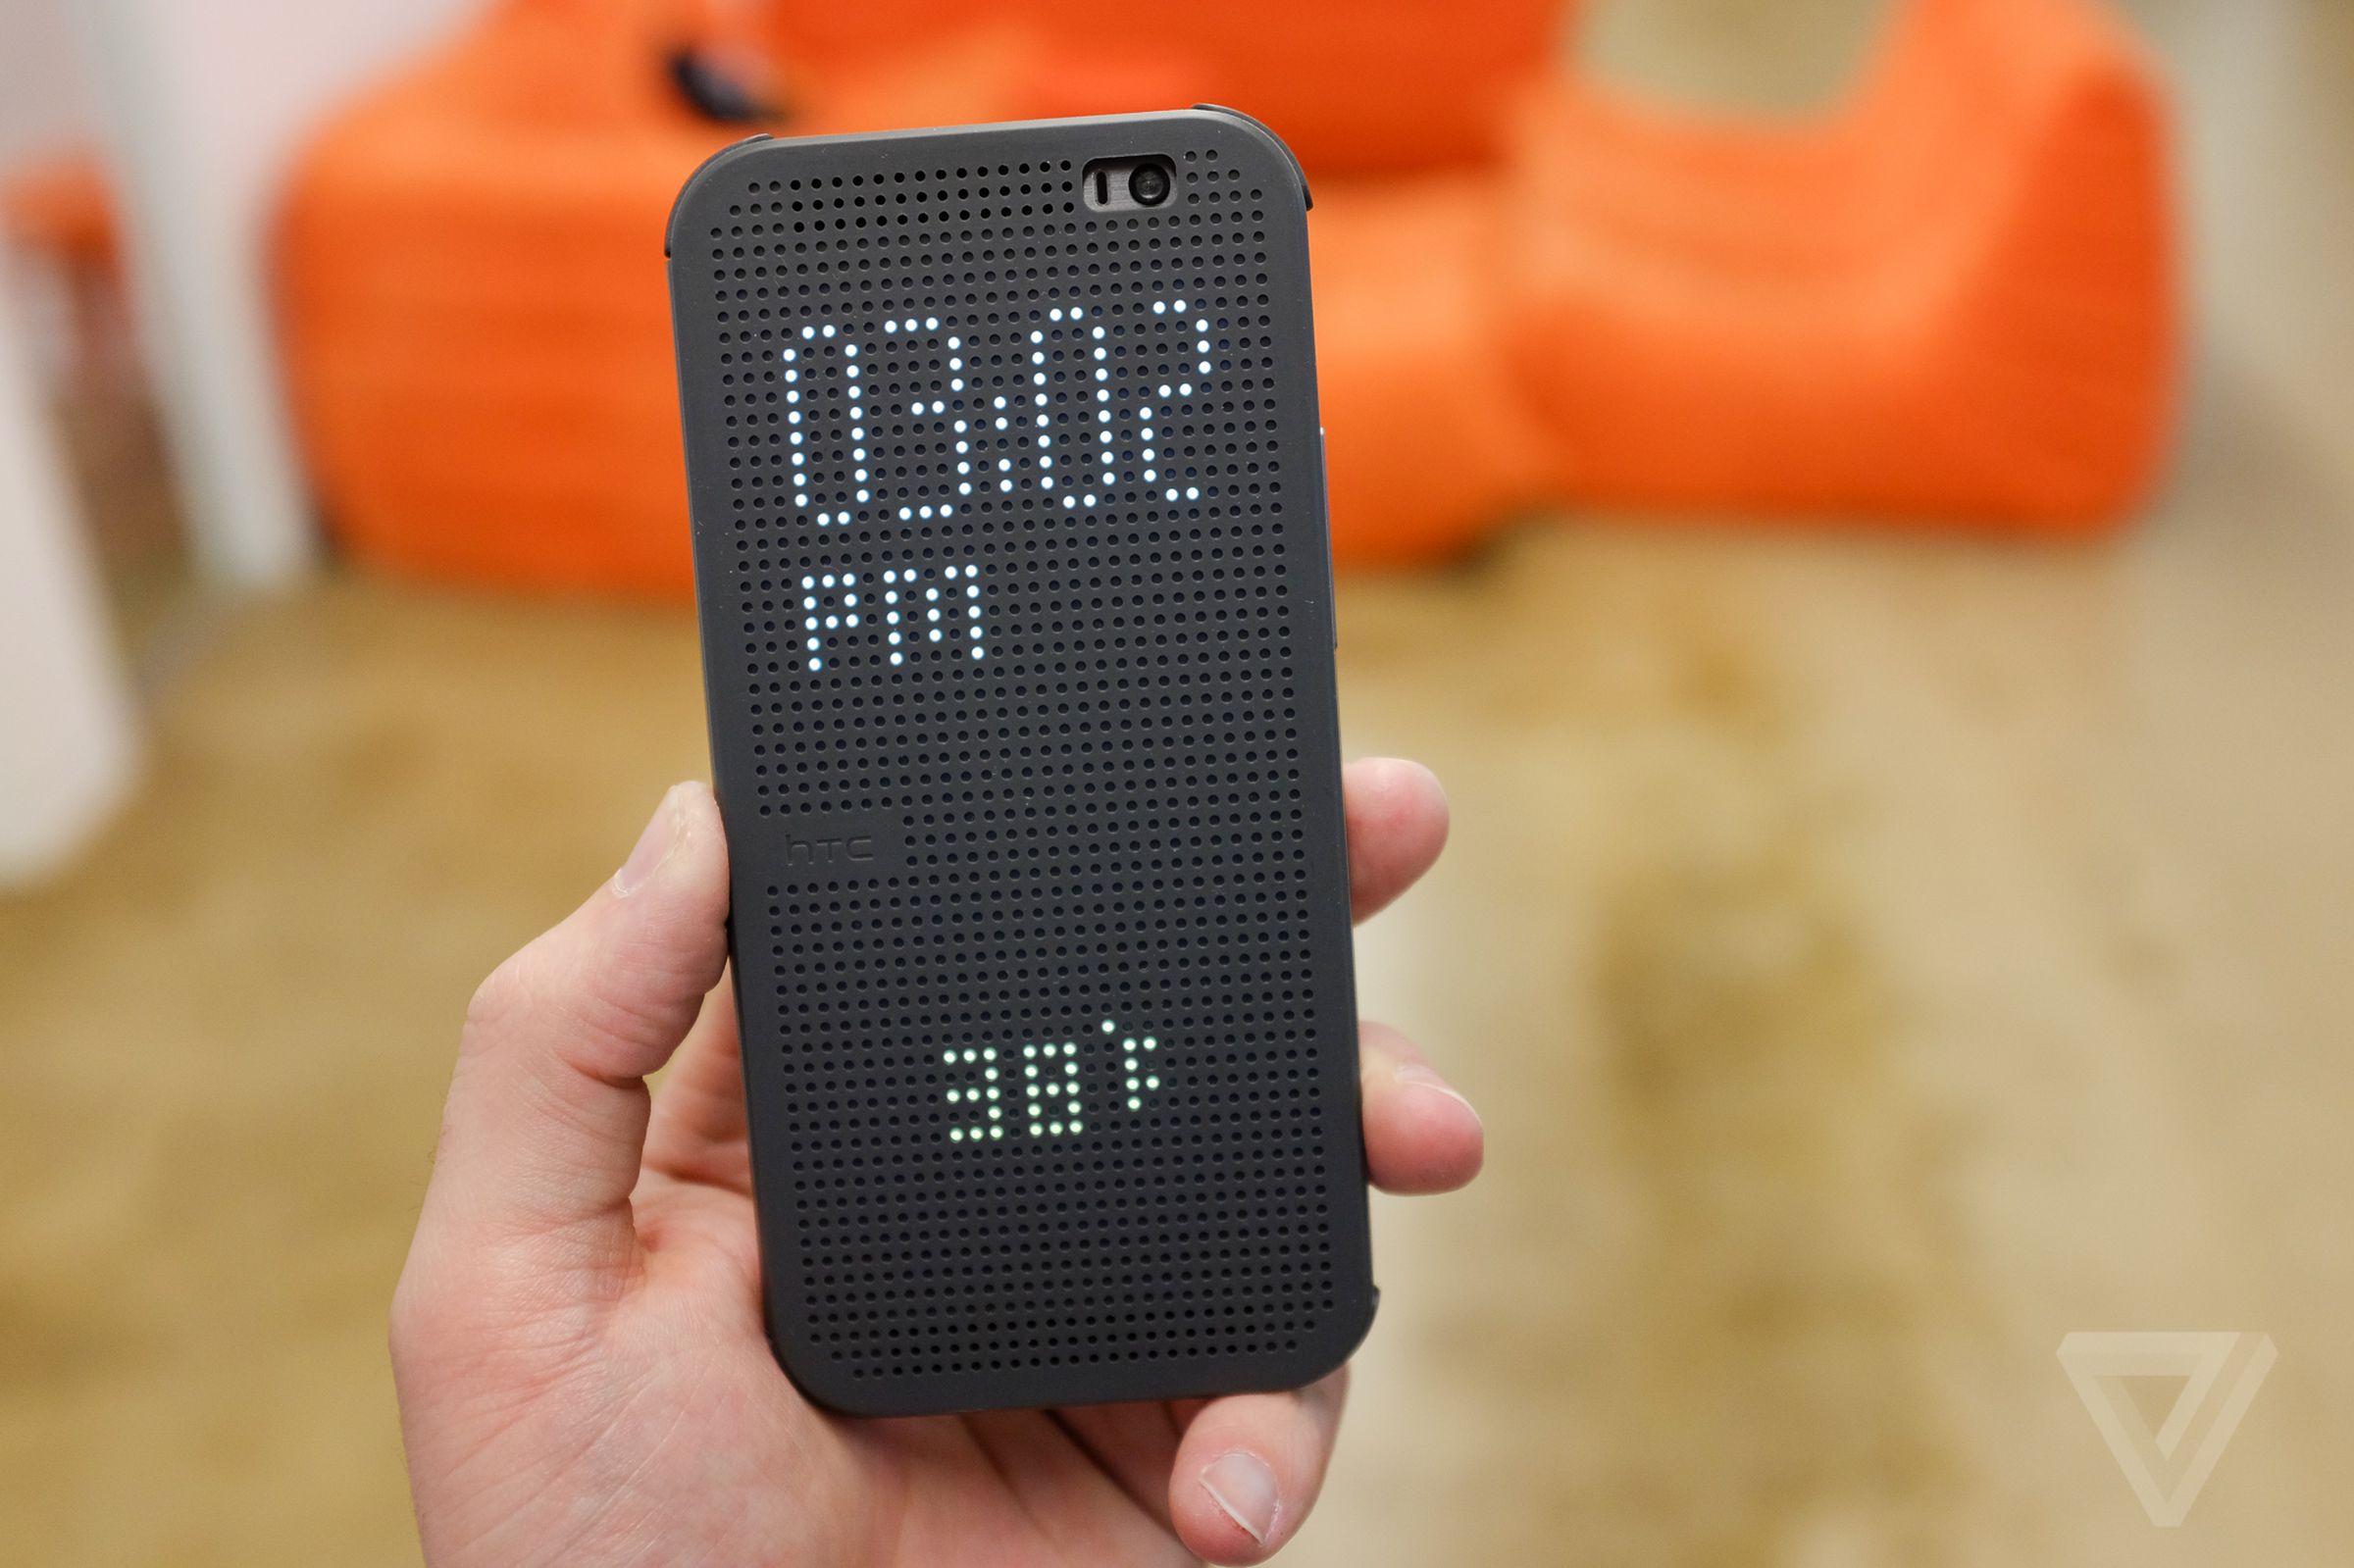 HTC Dot View case for the One